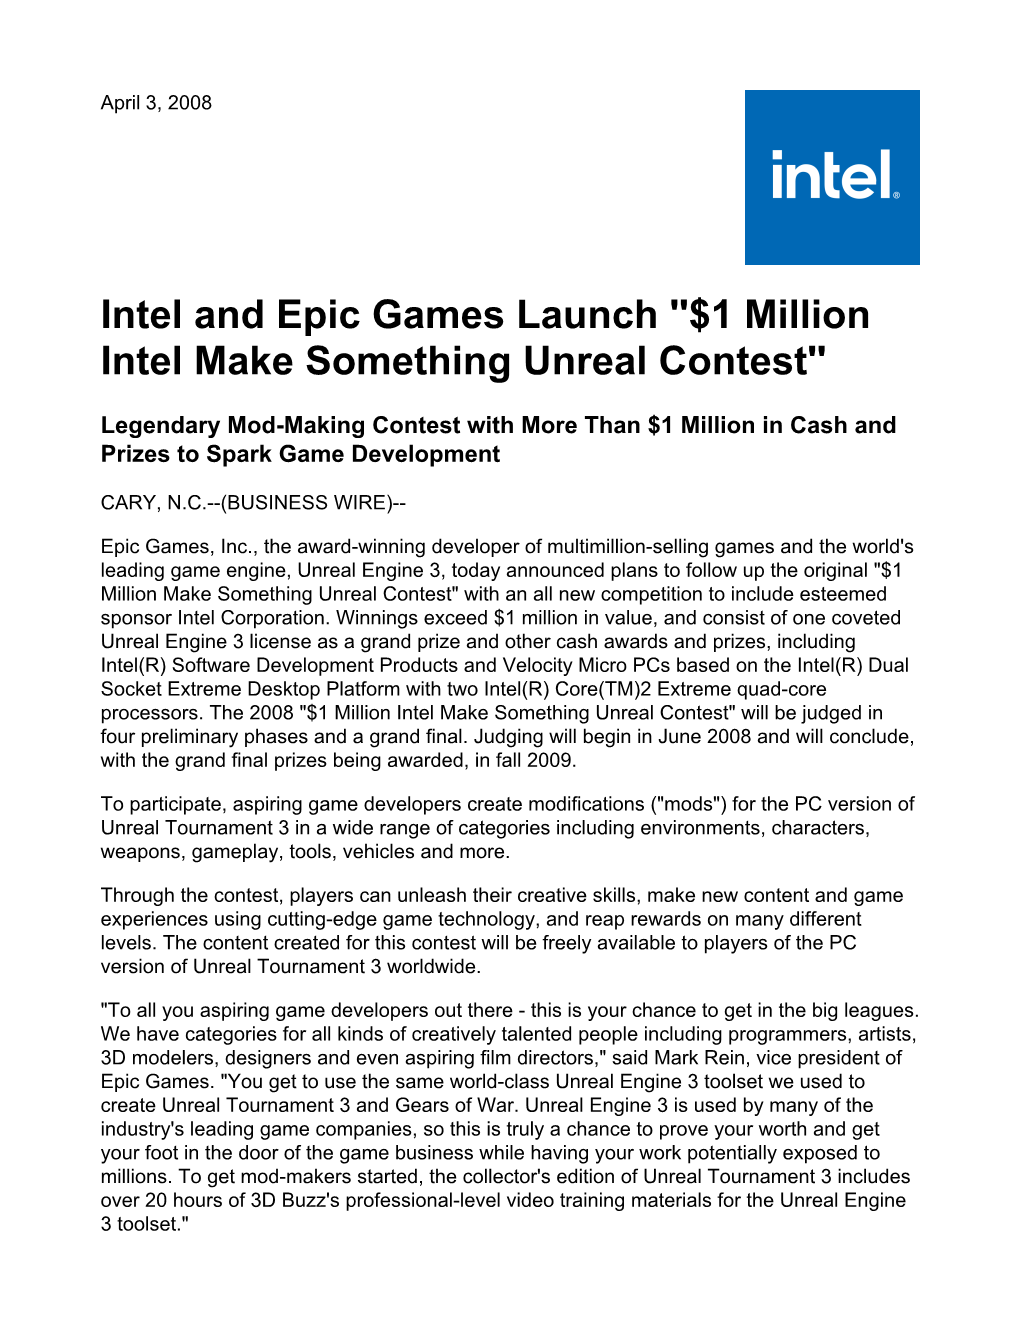 Intel and Epic Games Launch ''$1 Million Intel Make Something Unreal Contest''